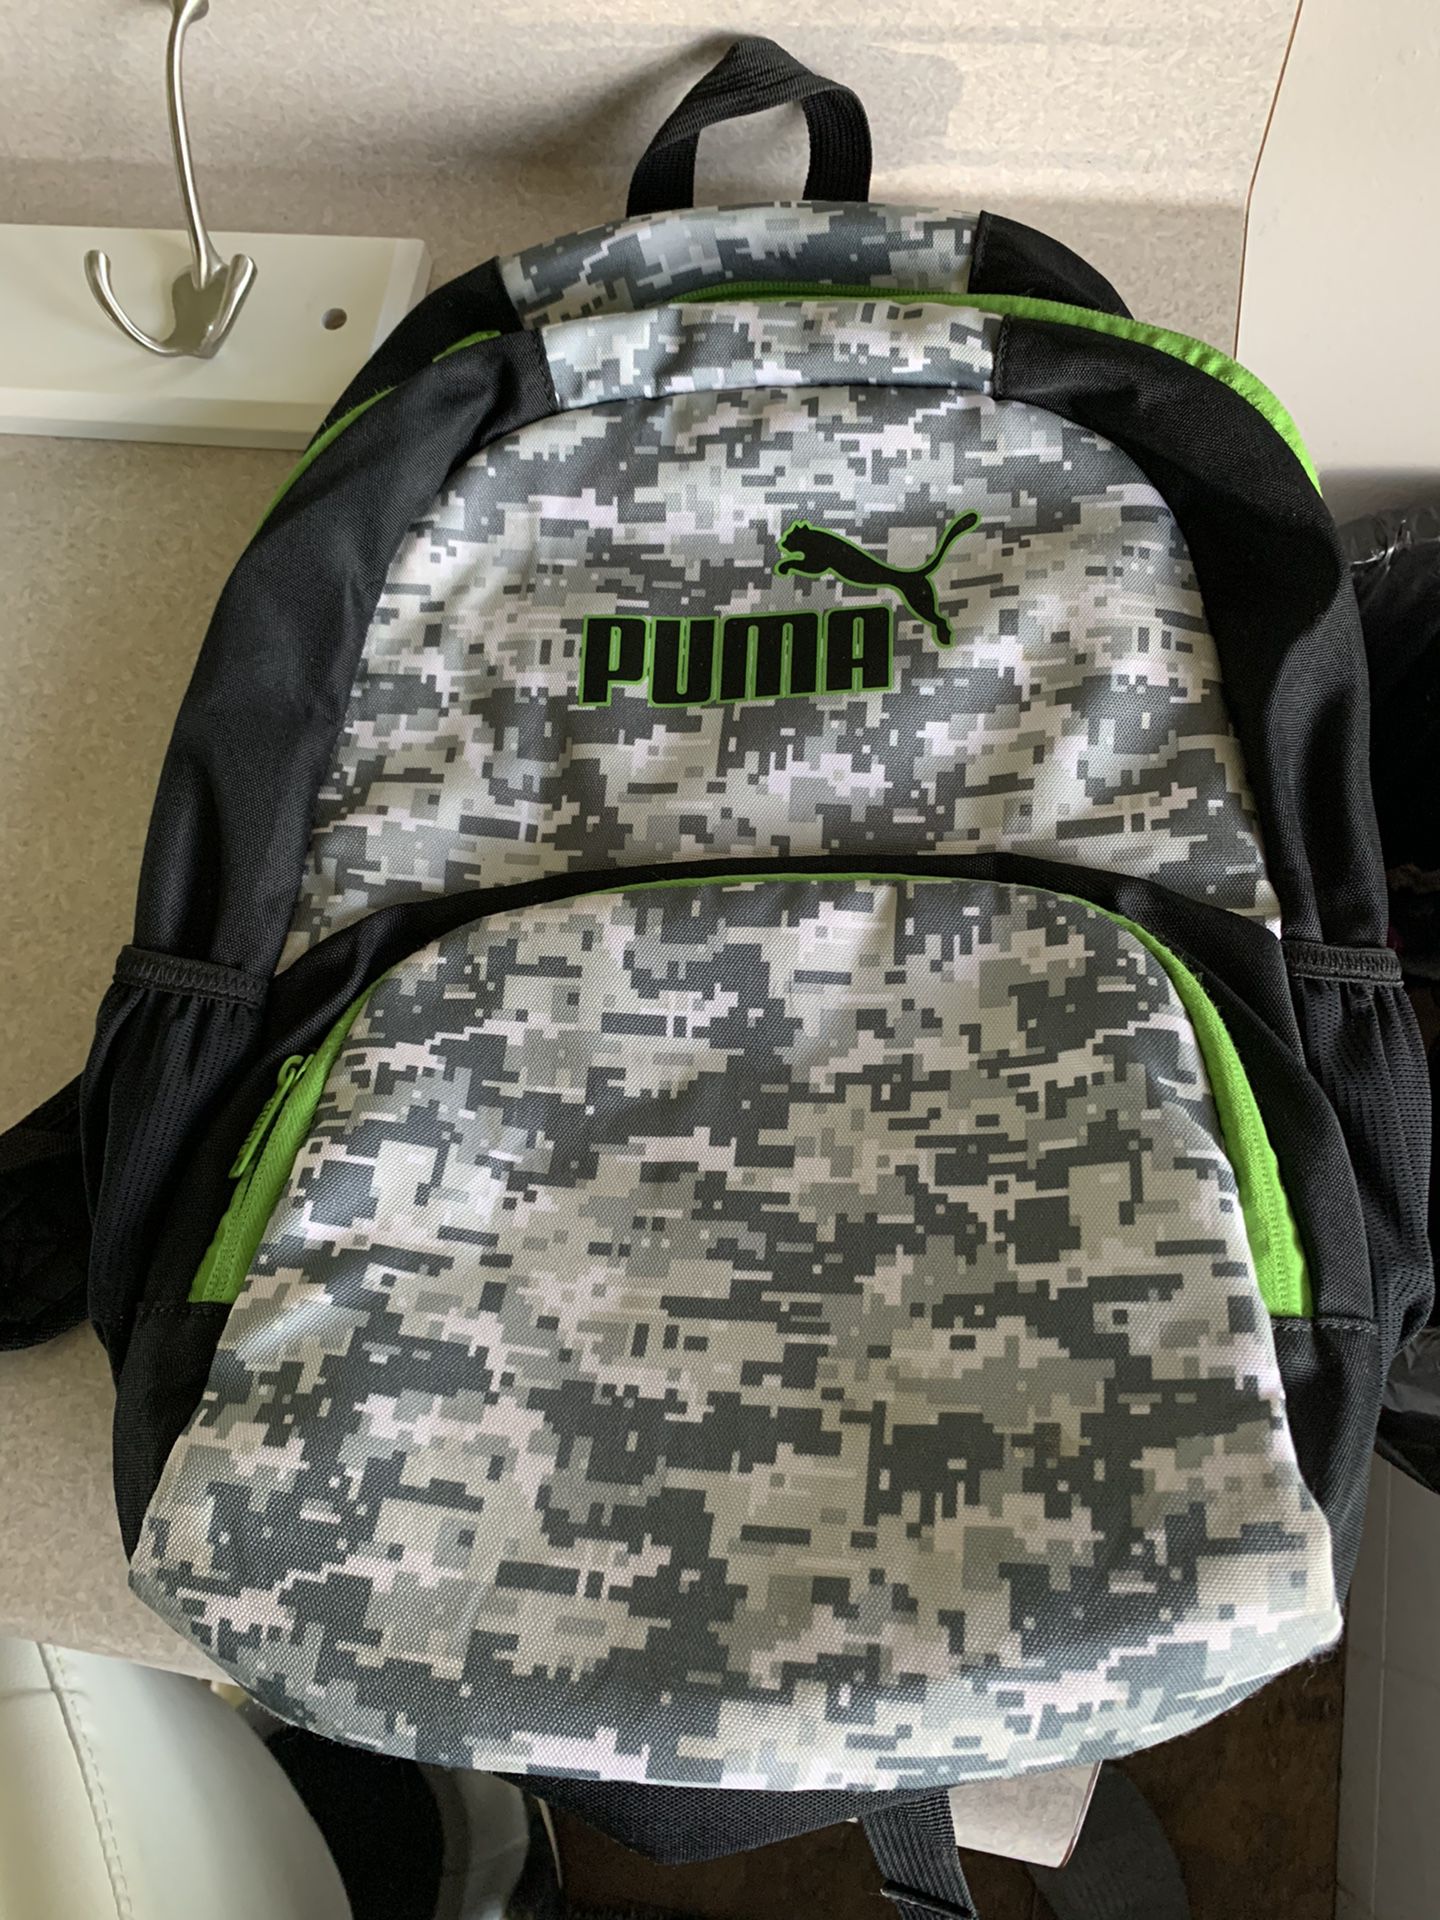 Puma backpack excellent condition